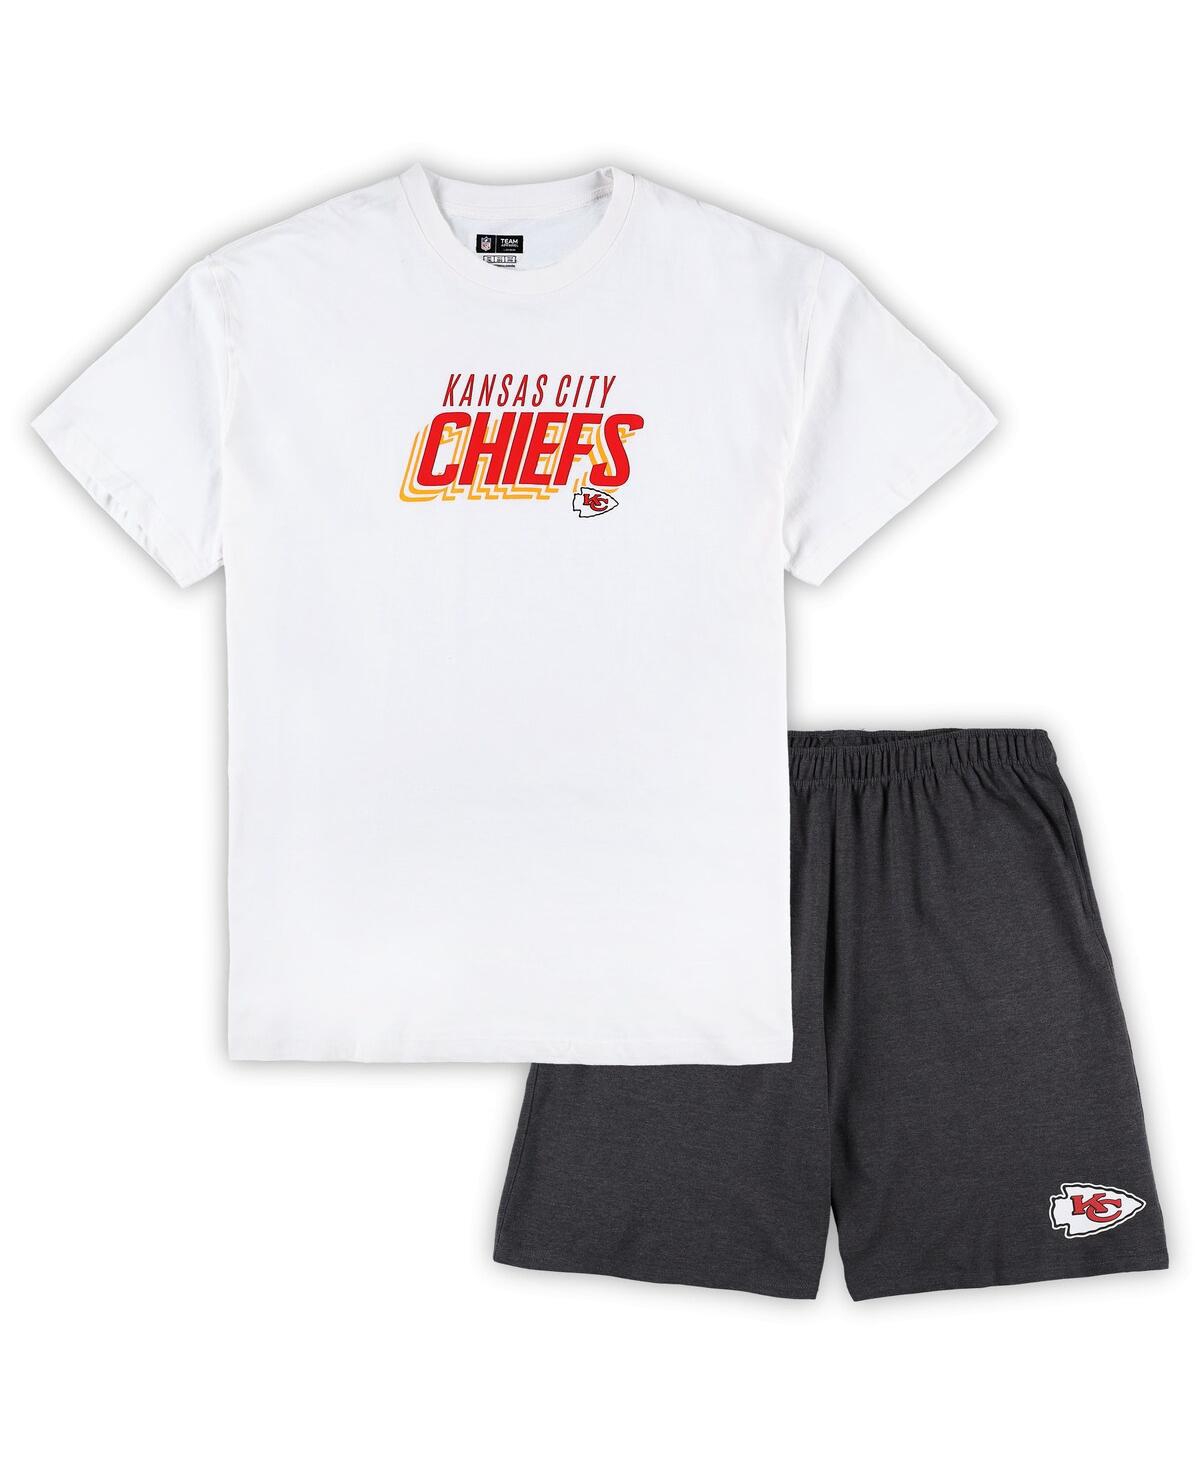 Men's Concepts Sport White, Charcoal Kansas City Chiefs Big and Tall T-shirt and Shorts Set - White, Charcoal